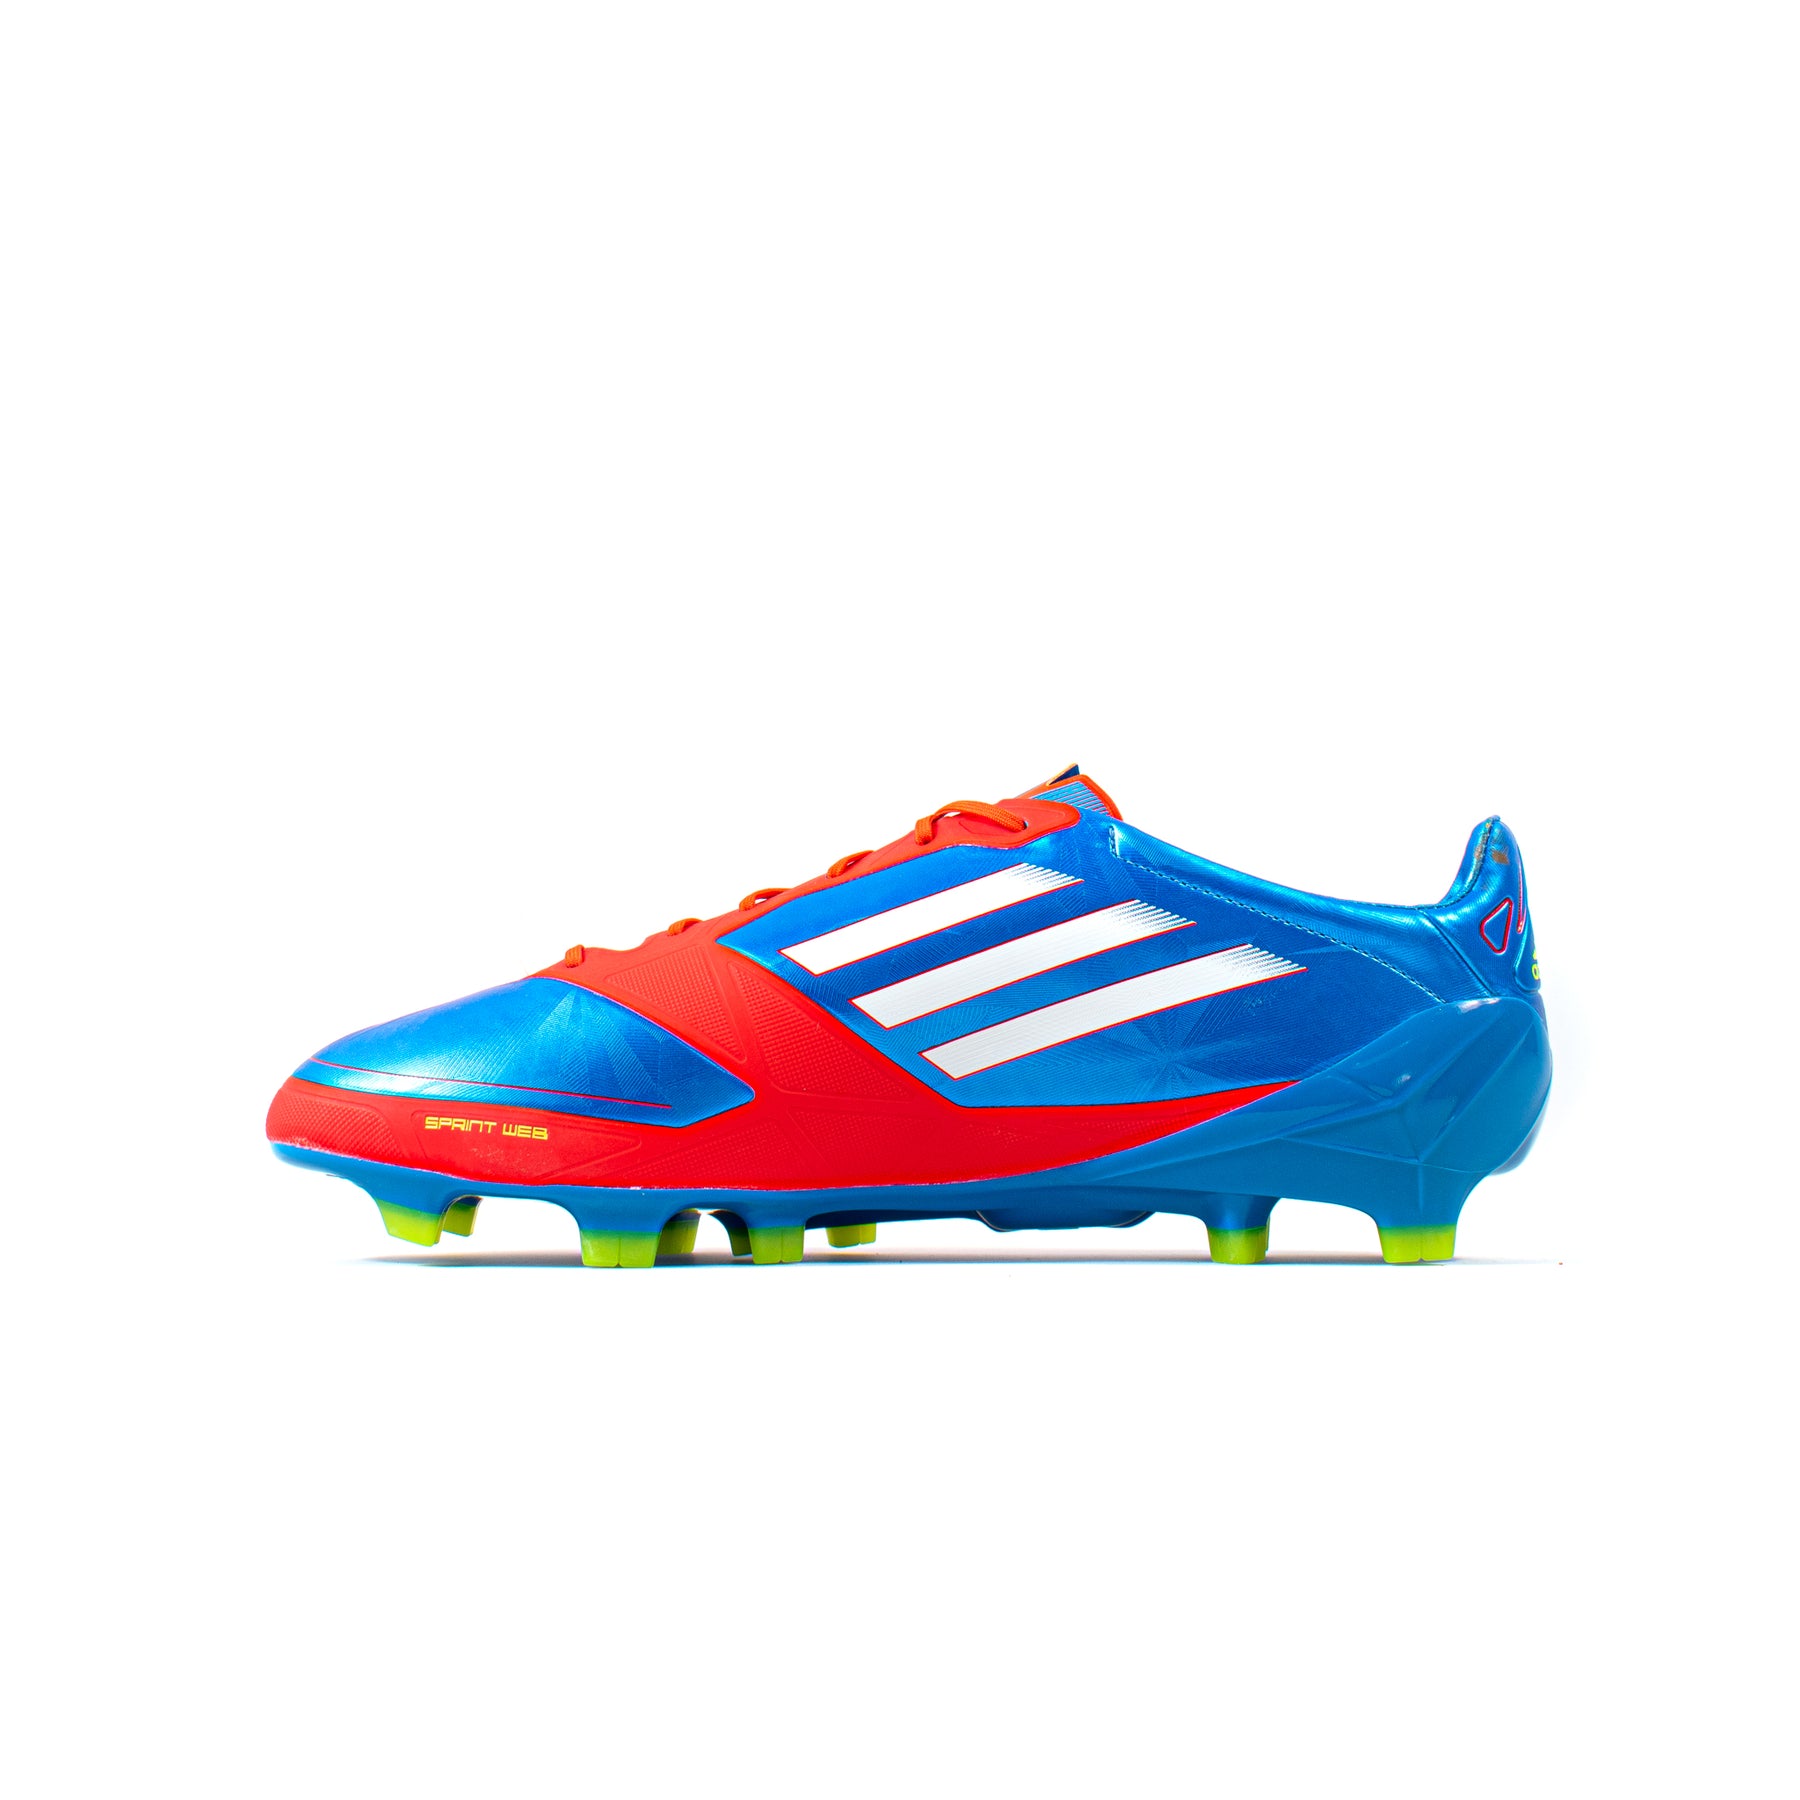 Adidas Adizero Blue Red Synthetic FG – Classic Soccer Cleats